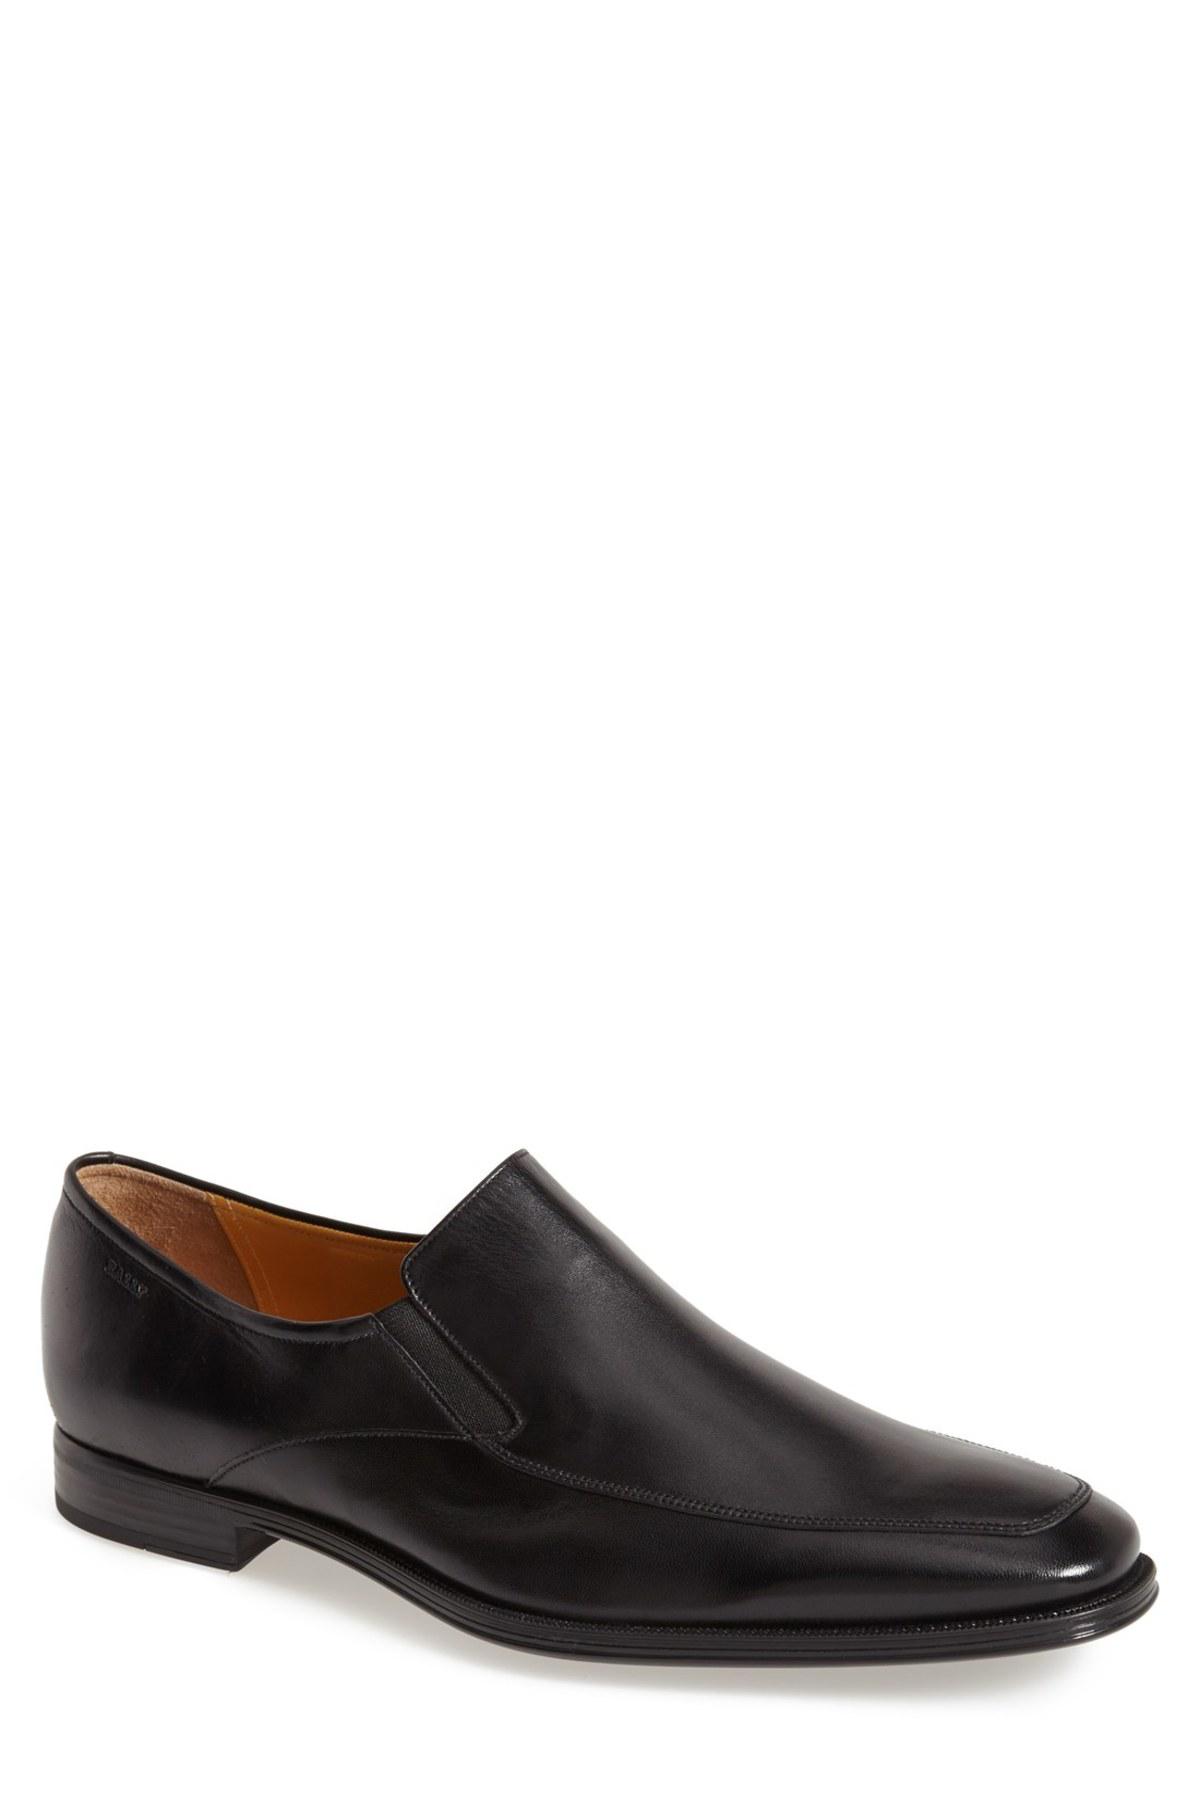 Bally Leather Thor Venetian Loafer - Extra Wide Width Available in ...